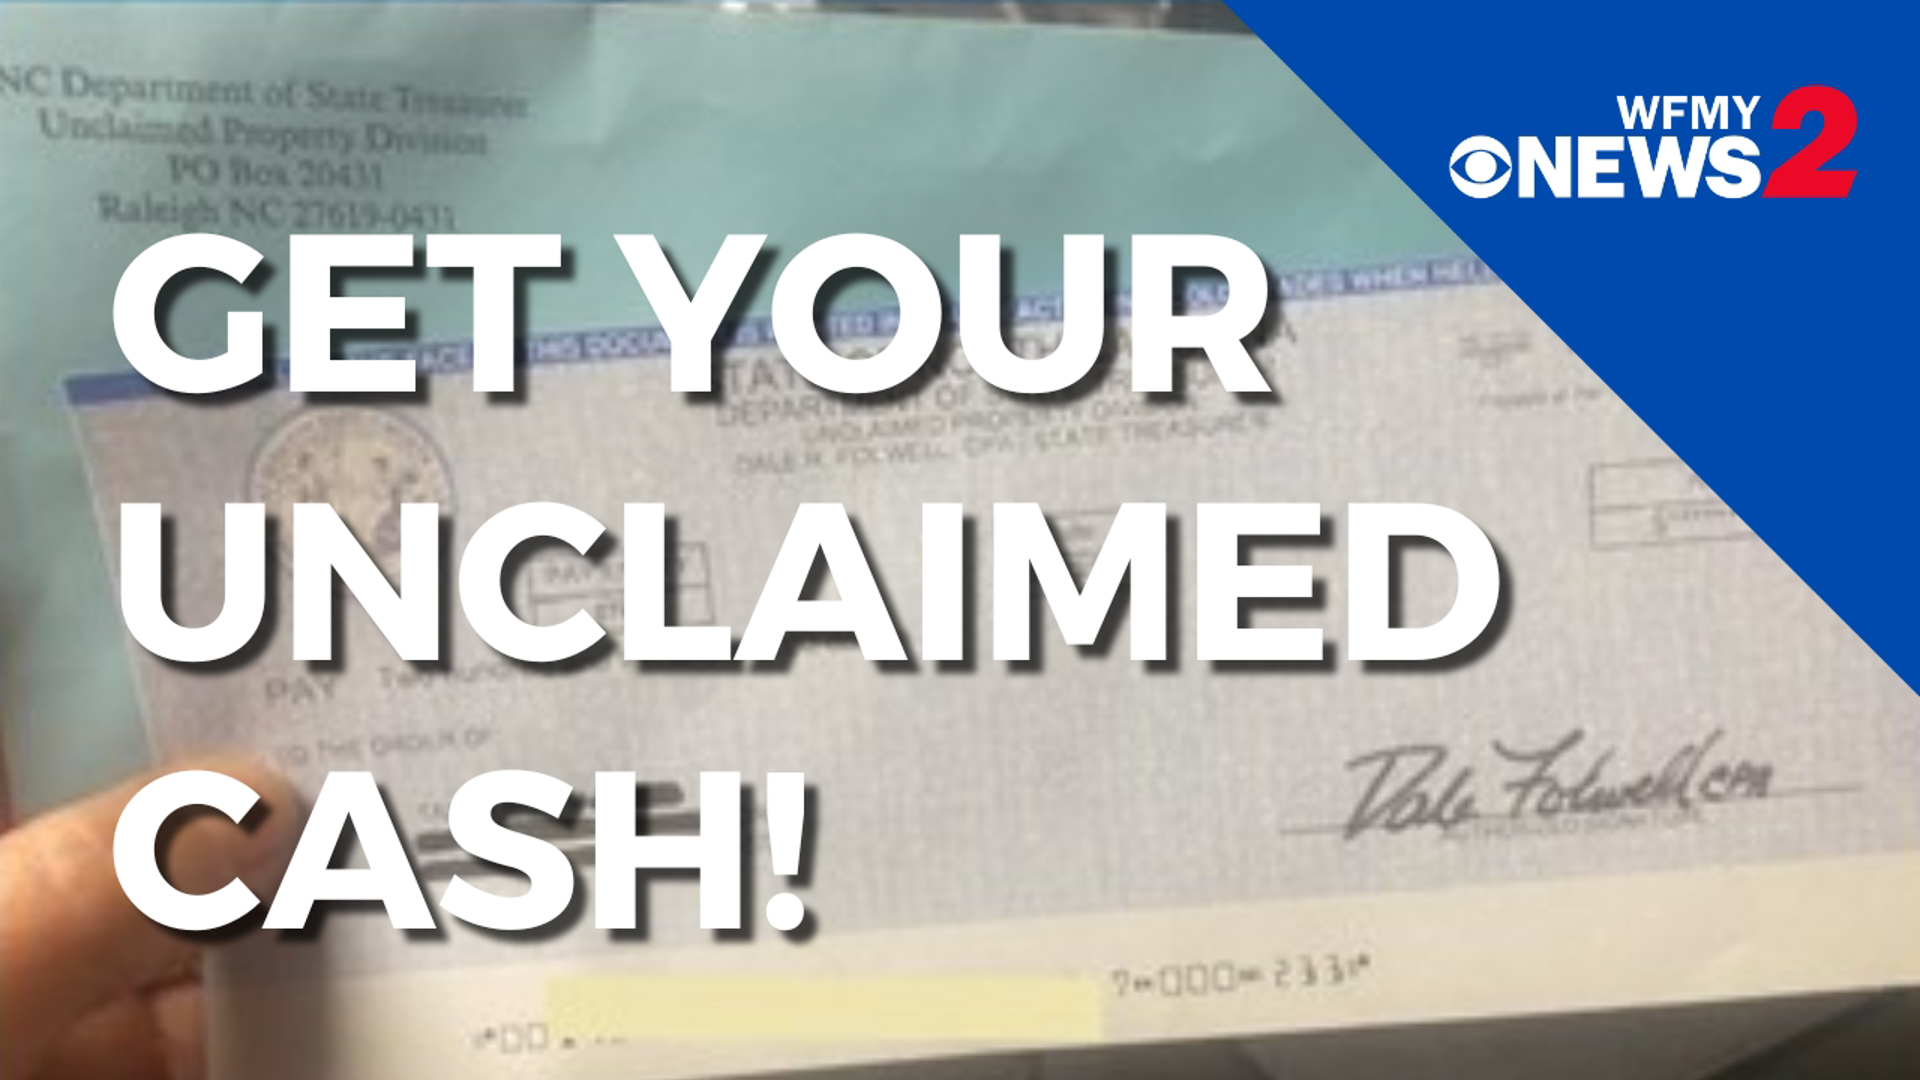 NC has $1.02 Billion in unclaimed cash and property. It's worth taking a few minutes to check your name.